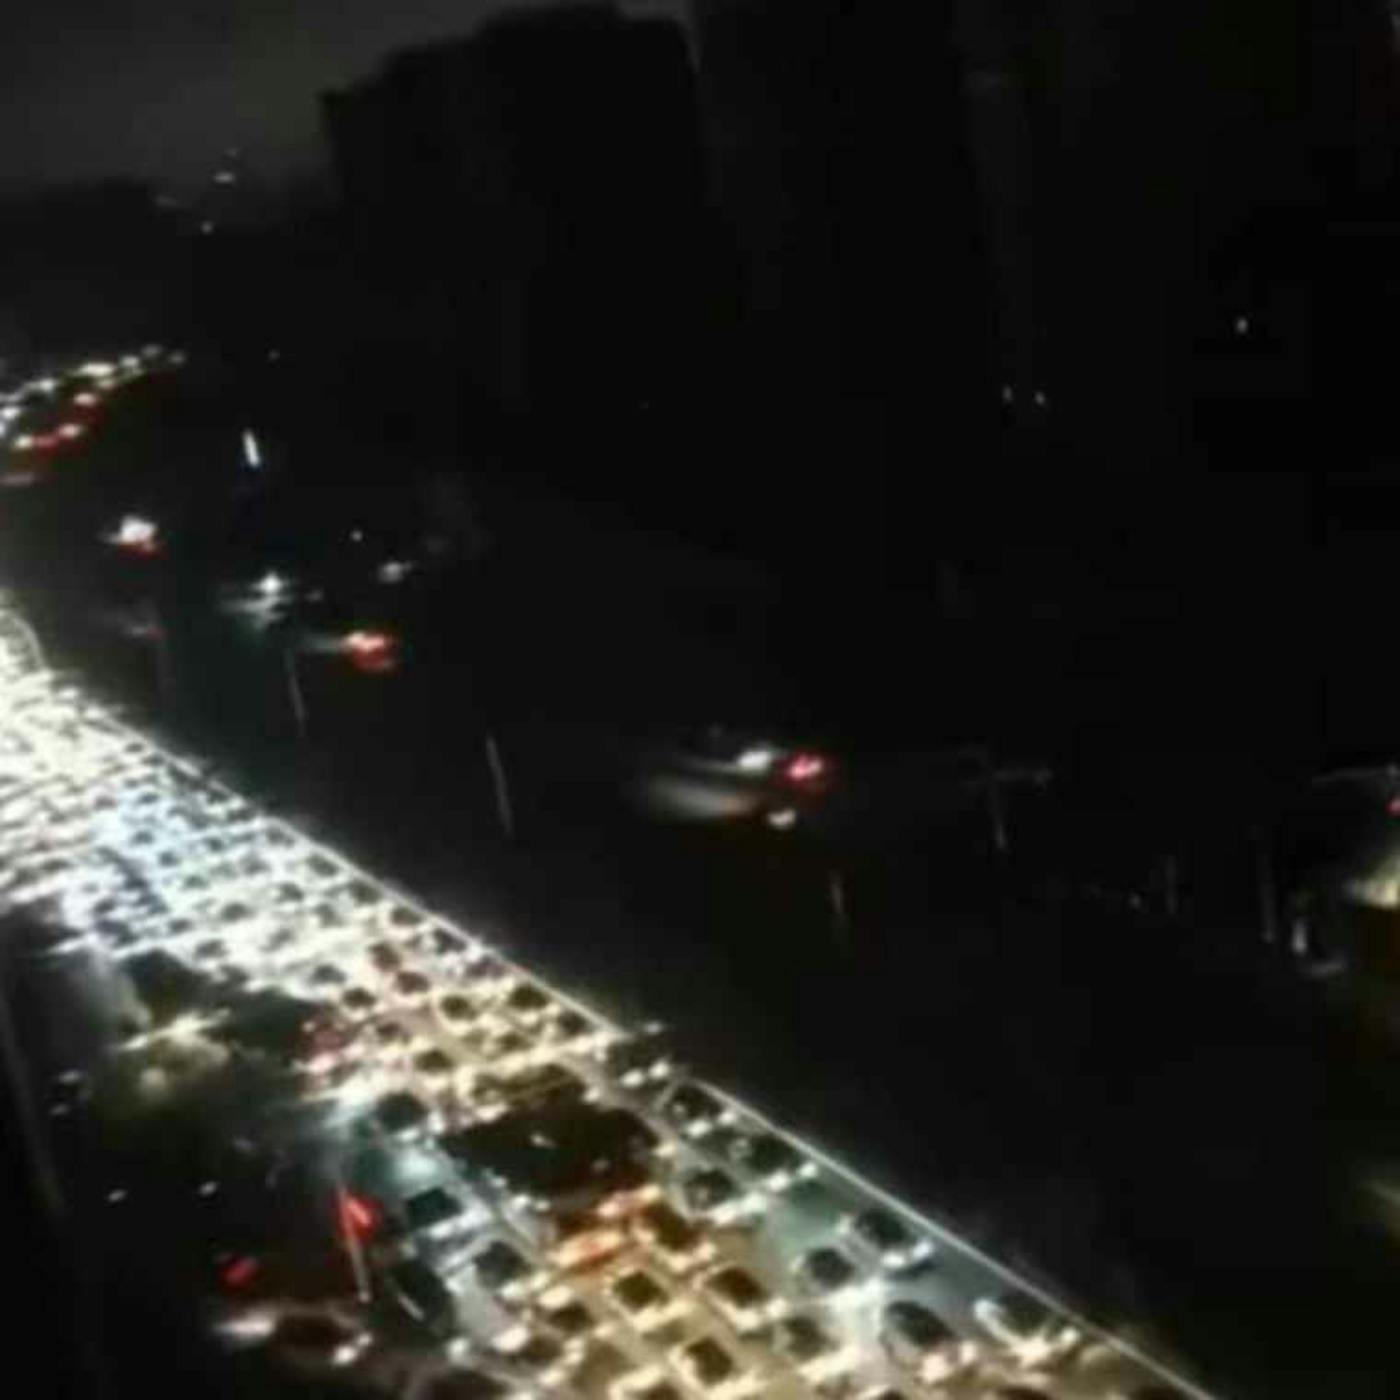 Why Does China Have Blackouts?